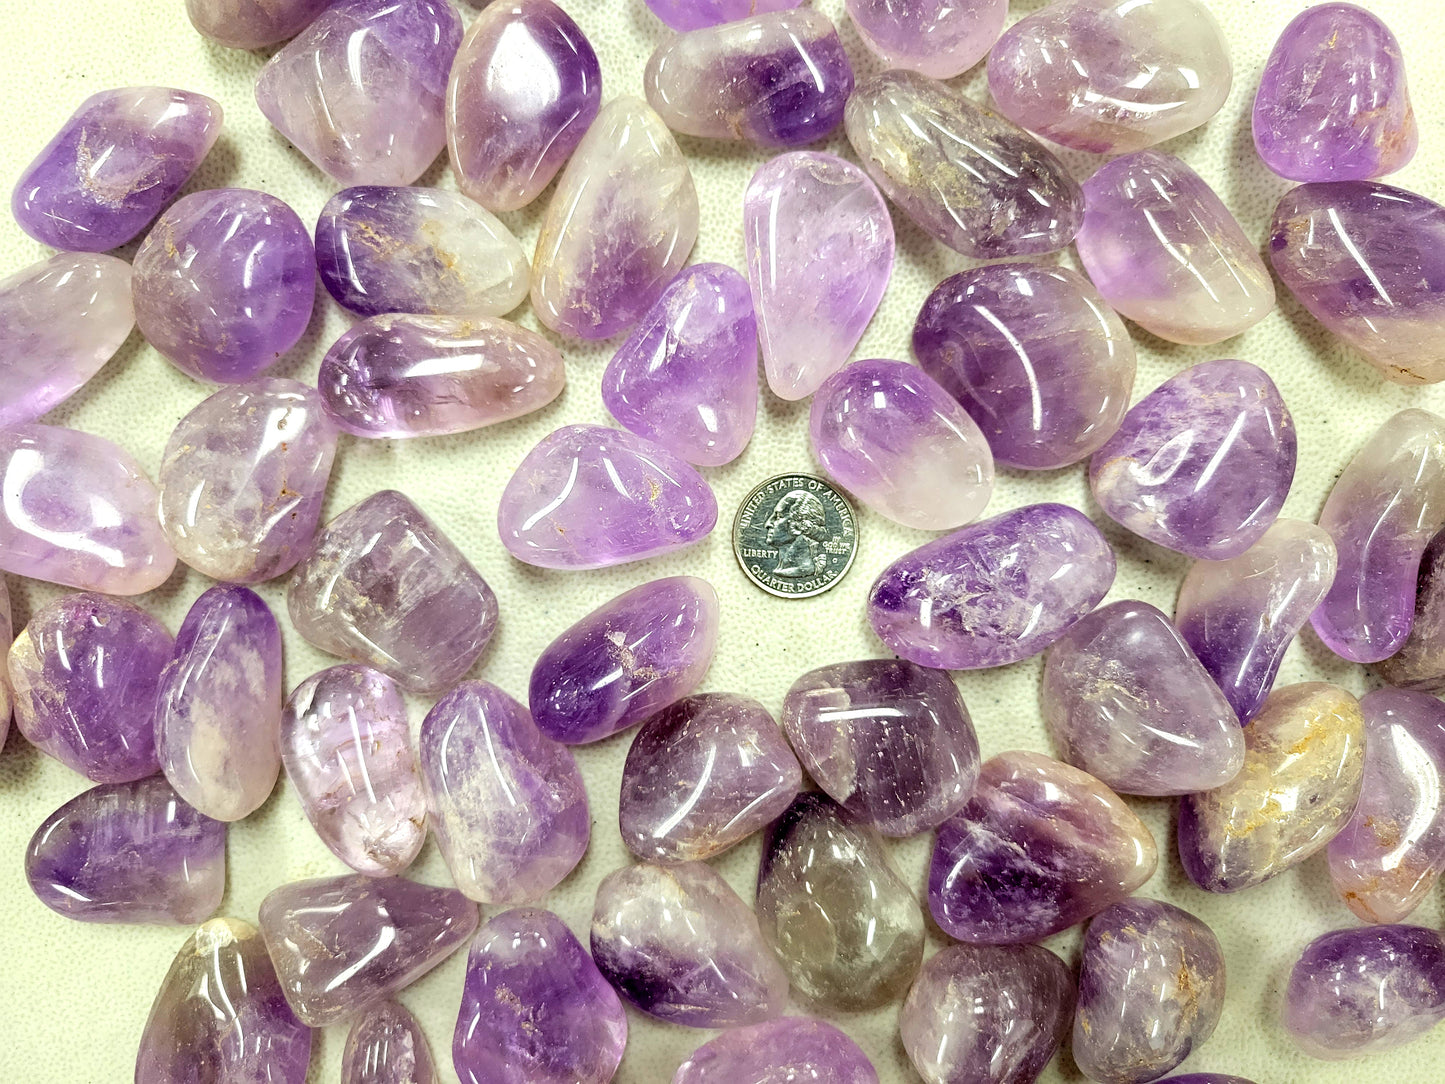 Large Tumbled Amethyst Crystals - 1.5 to 2.5 inches